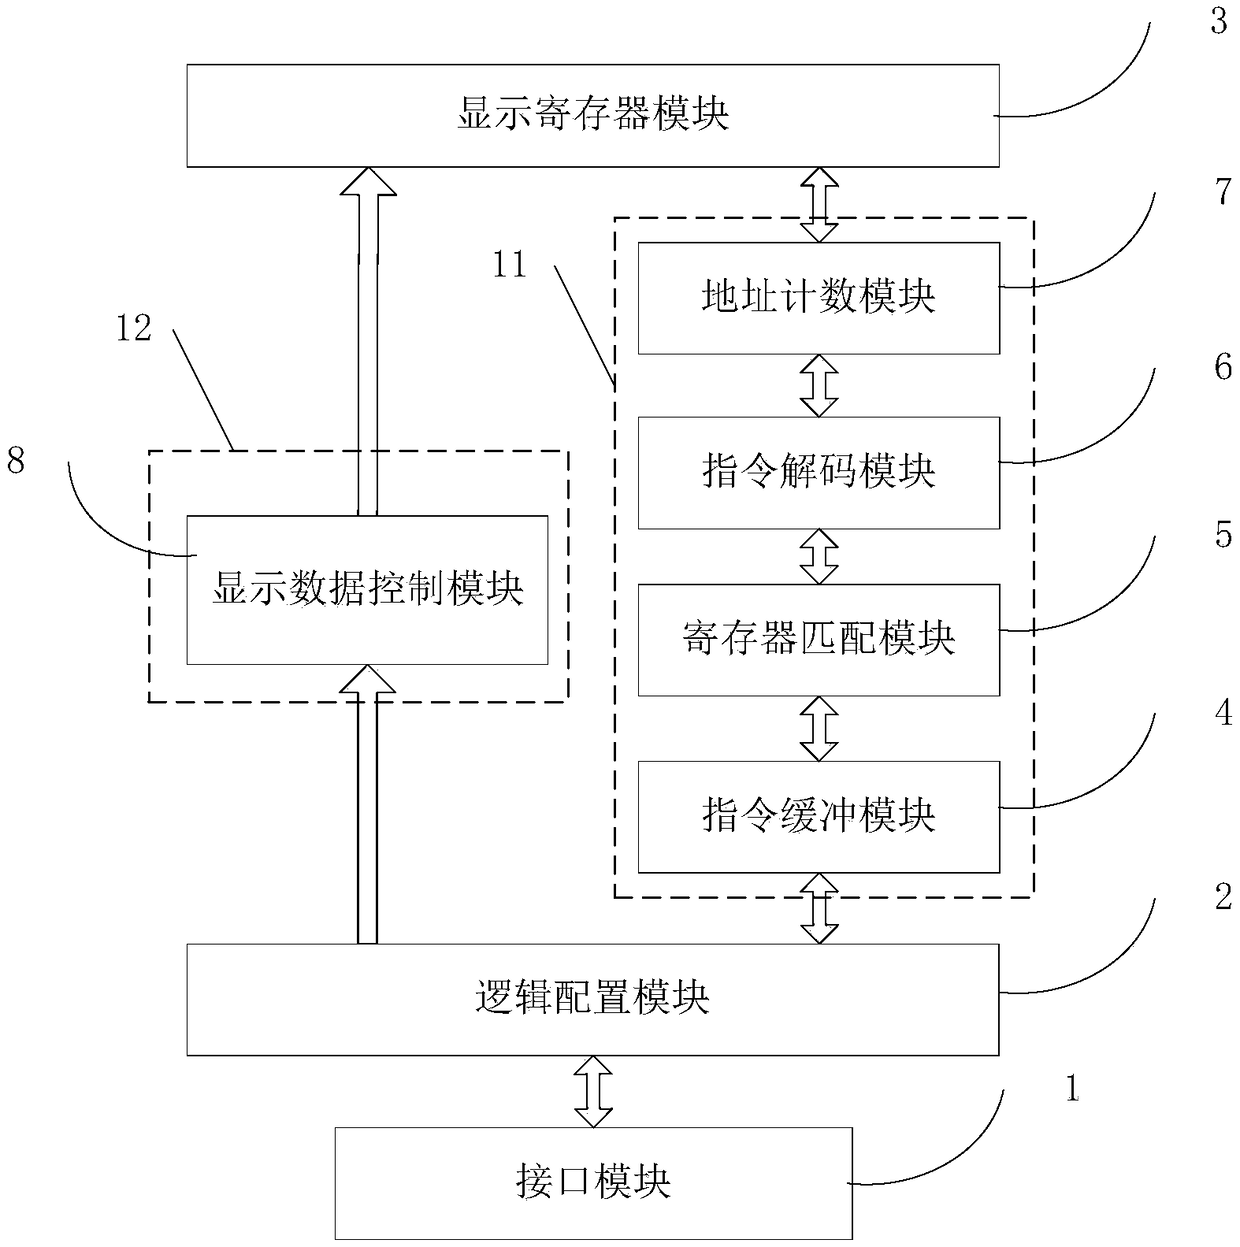 Display control structure, display control method, display substrate, and display device